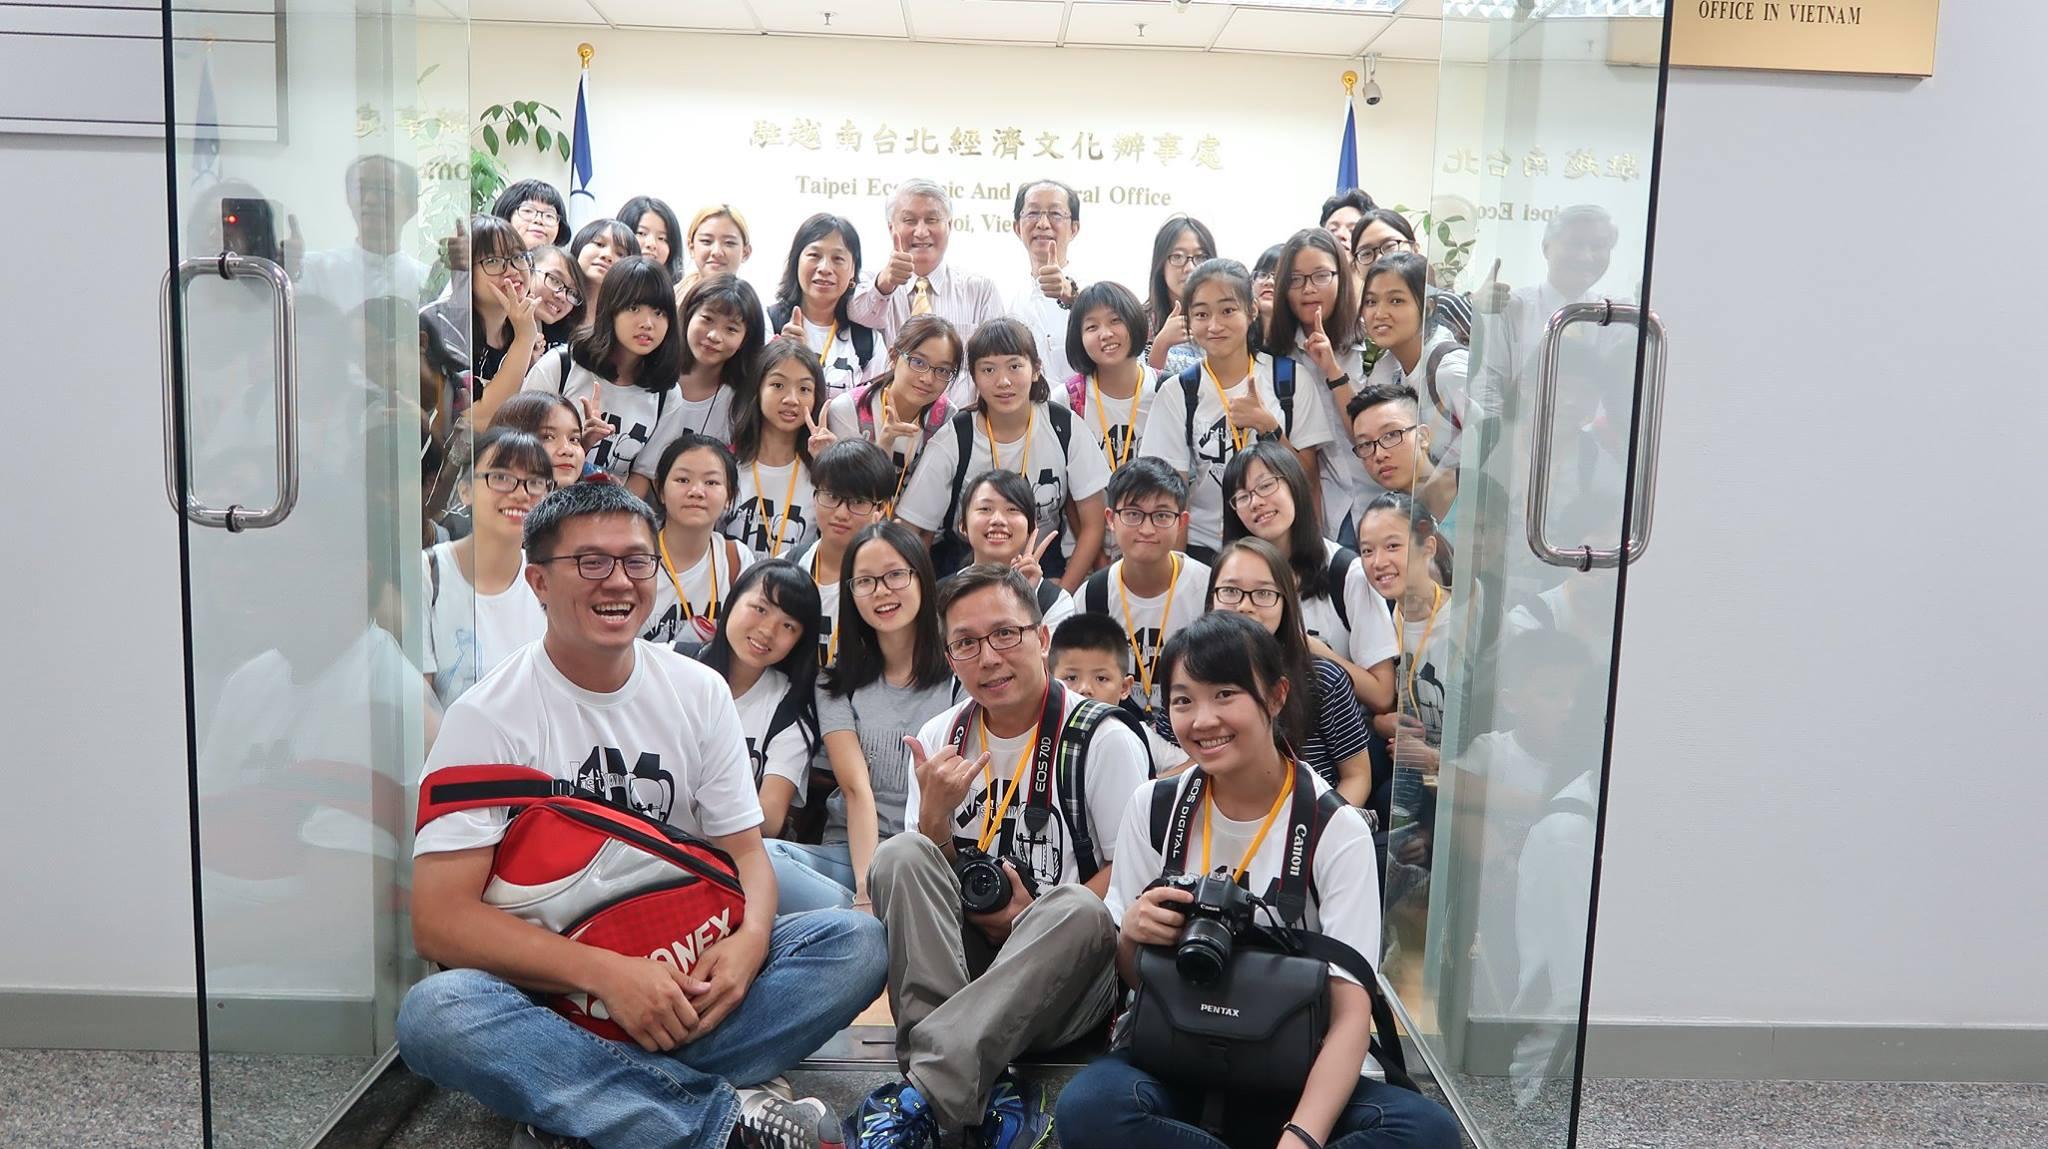  (left 5 at the back row: Huang,Yun-Jin, the president of Jing Mei Girls Senior High School, left 6 at the back row: Richard R.C. Shih, Representative of the TECO in Vietnam, left 7 at the back row: Lee Ming, Director of education division of TECO in Vietnam.)

